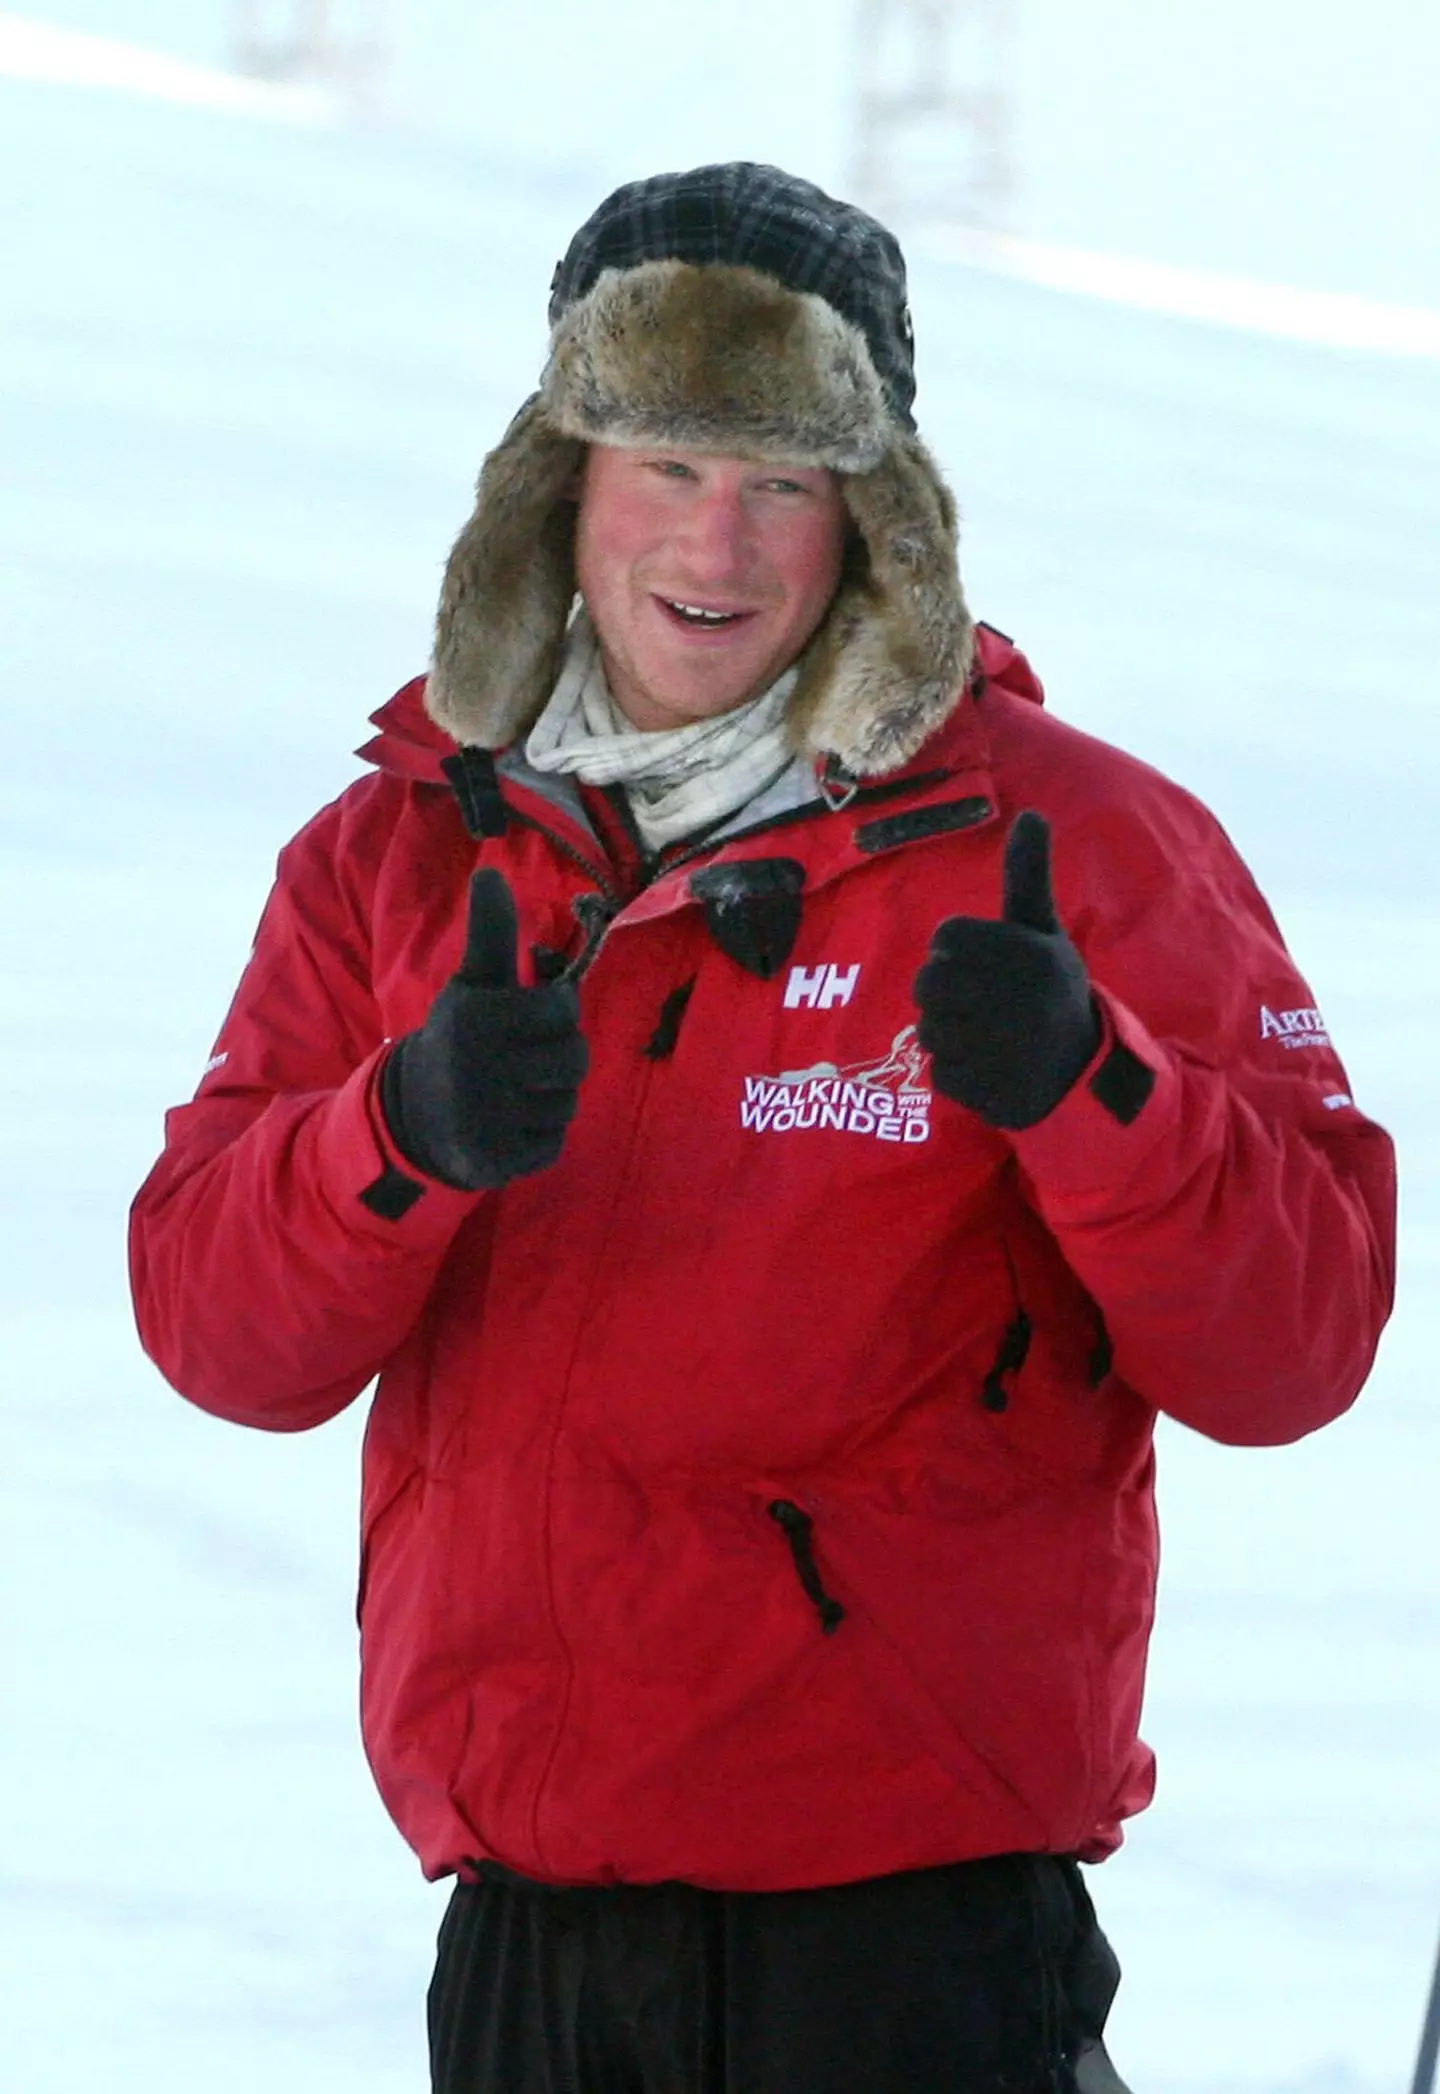 Prince Harry revealed he was suffering from frostbite on the penis following a trip to the North Pole in 2011.